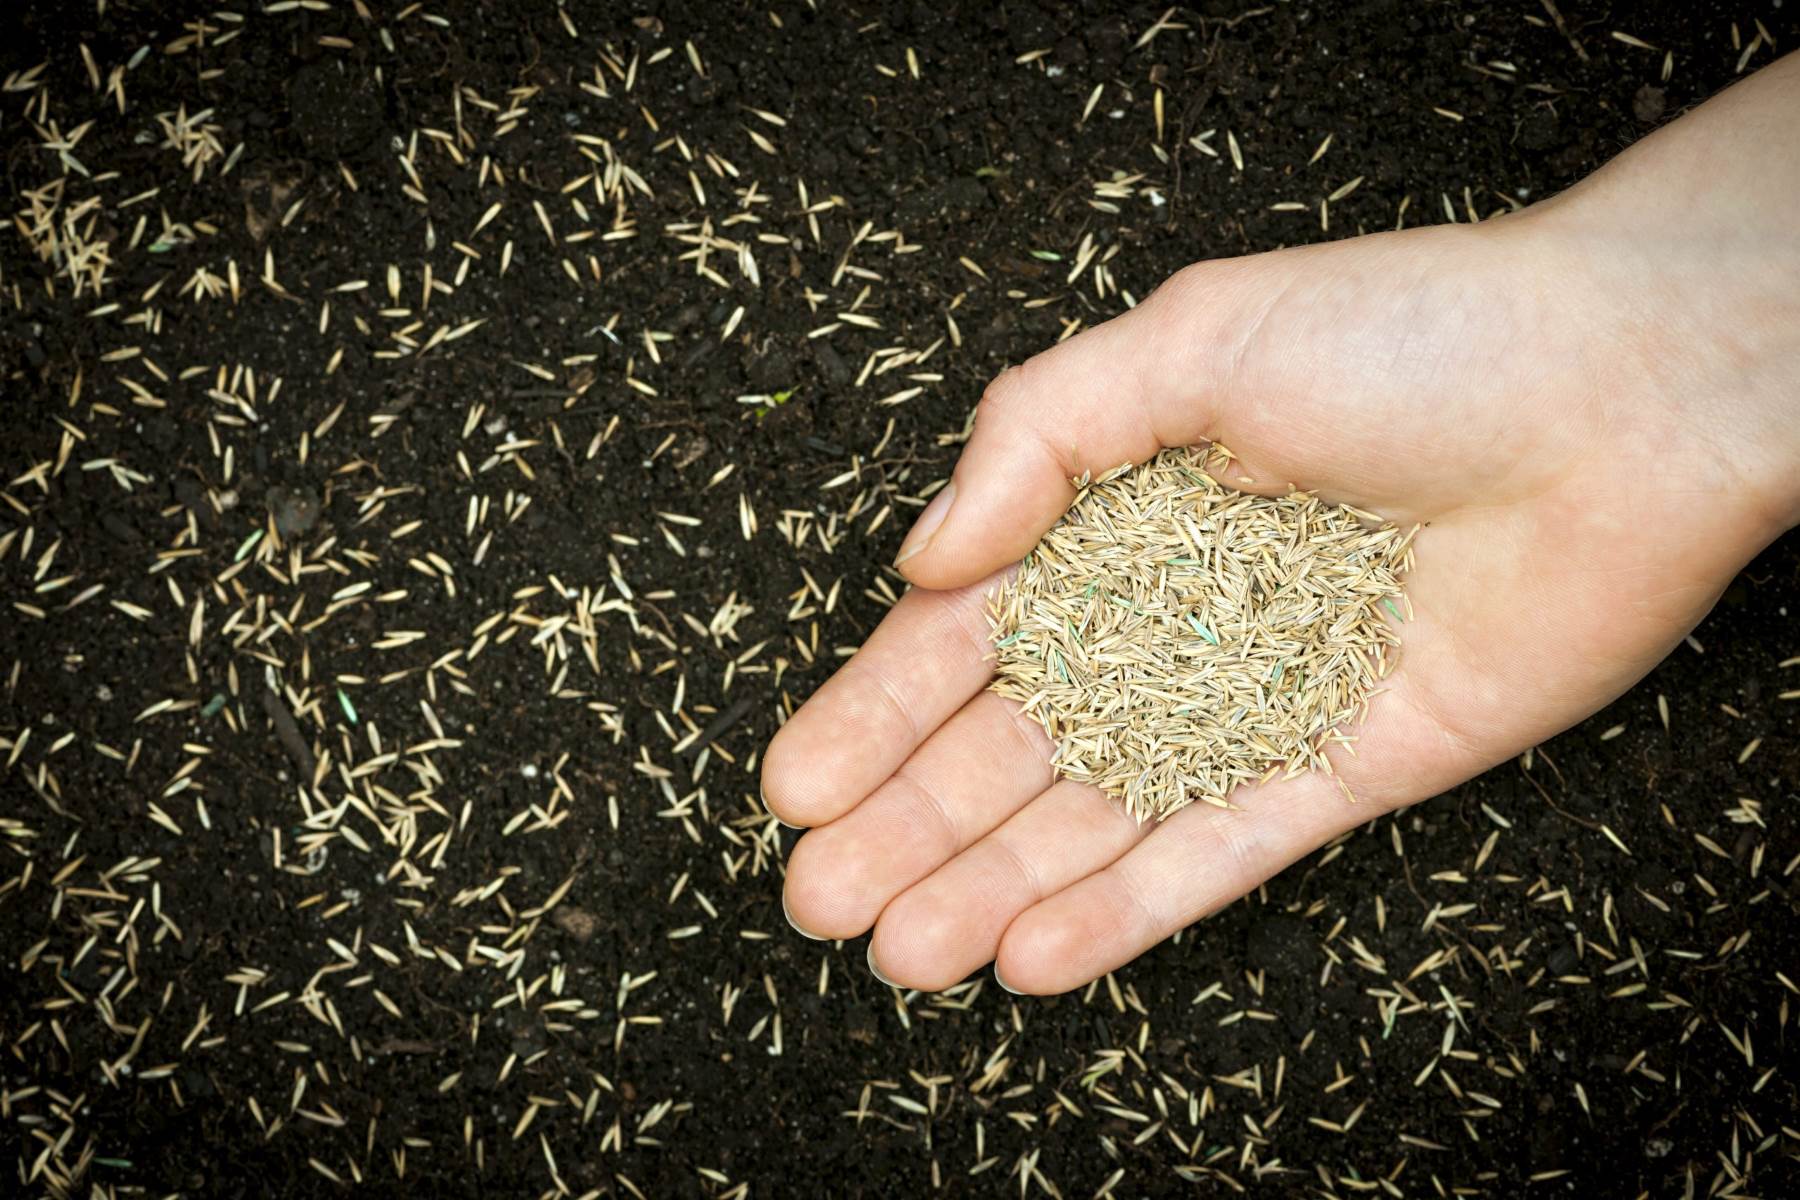 Where Do Grass Seeds Come From